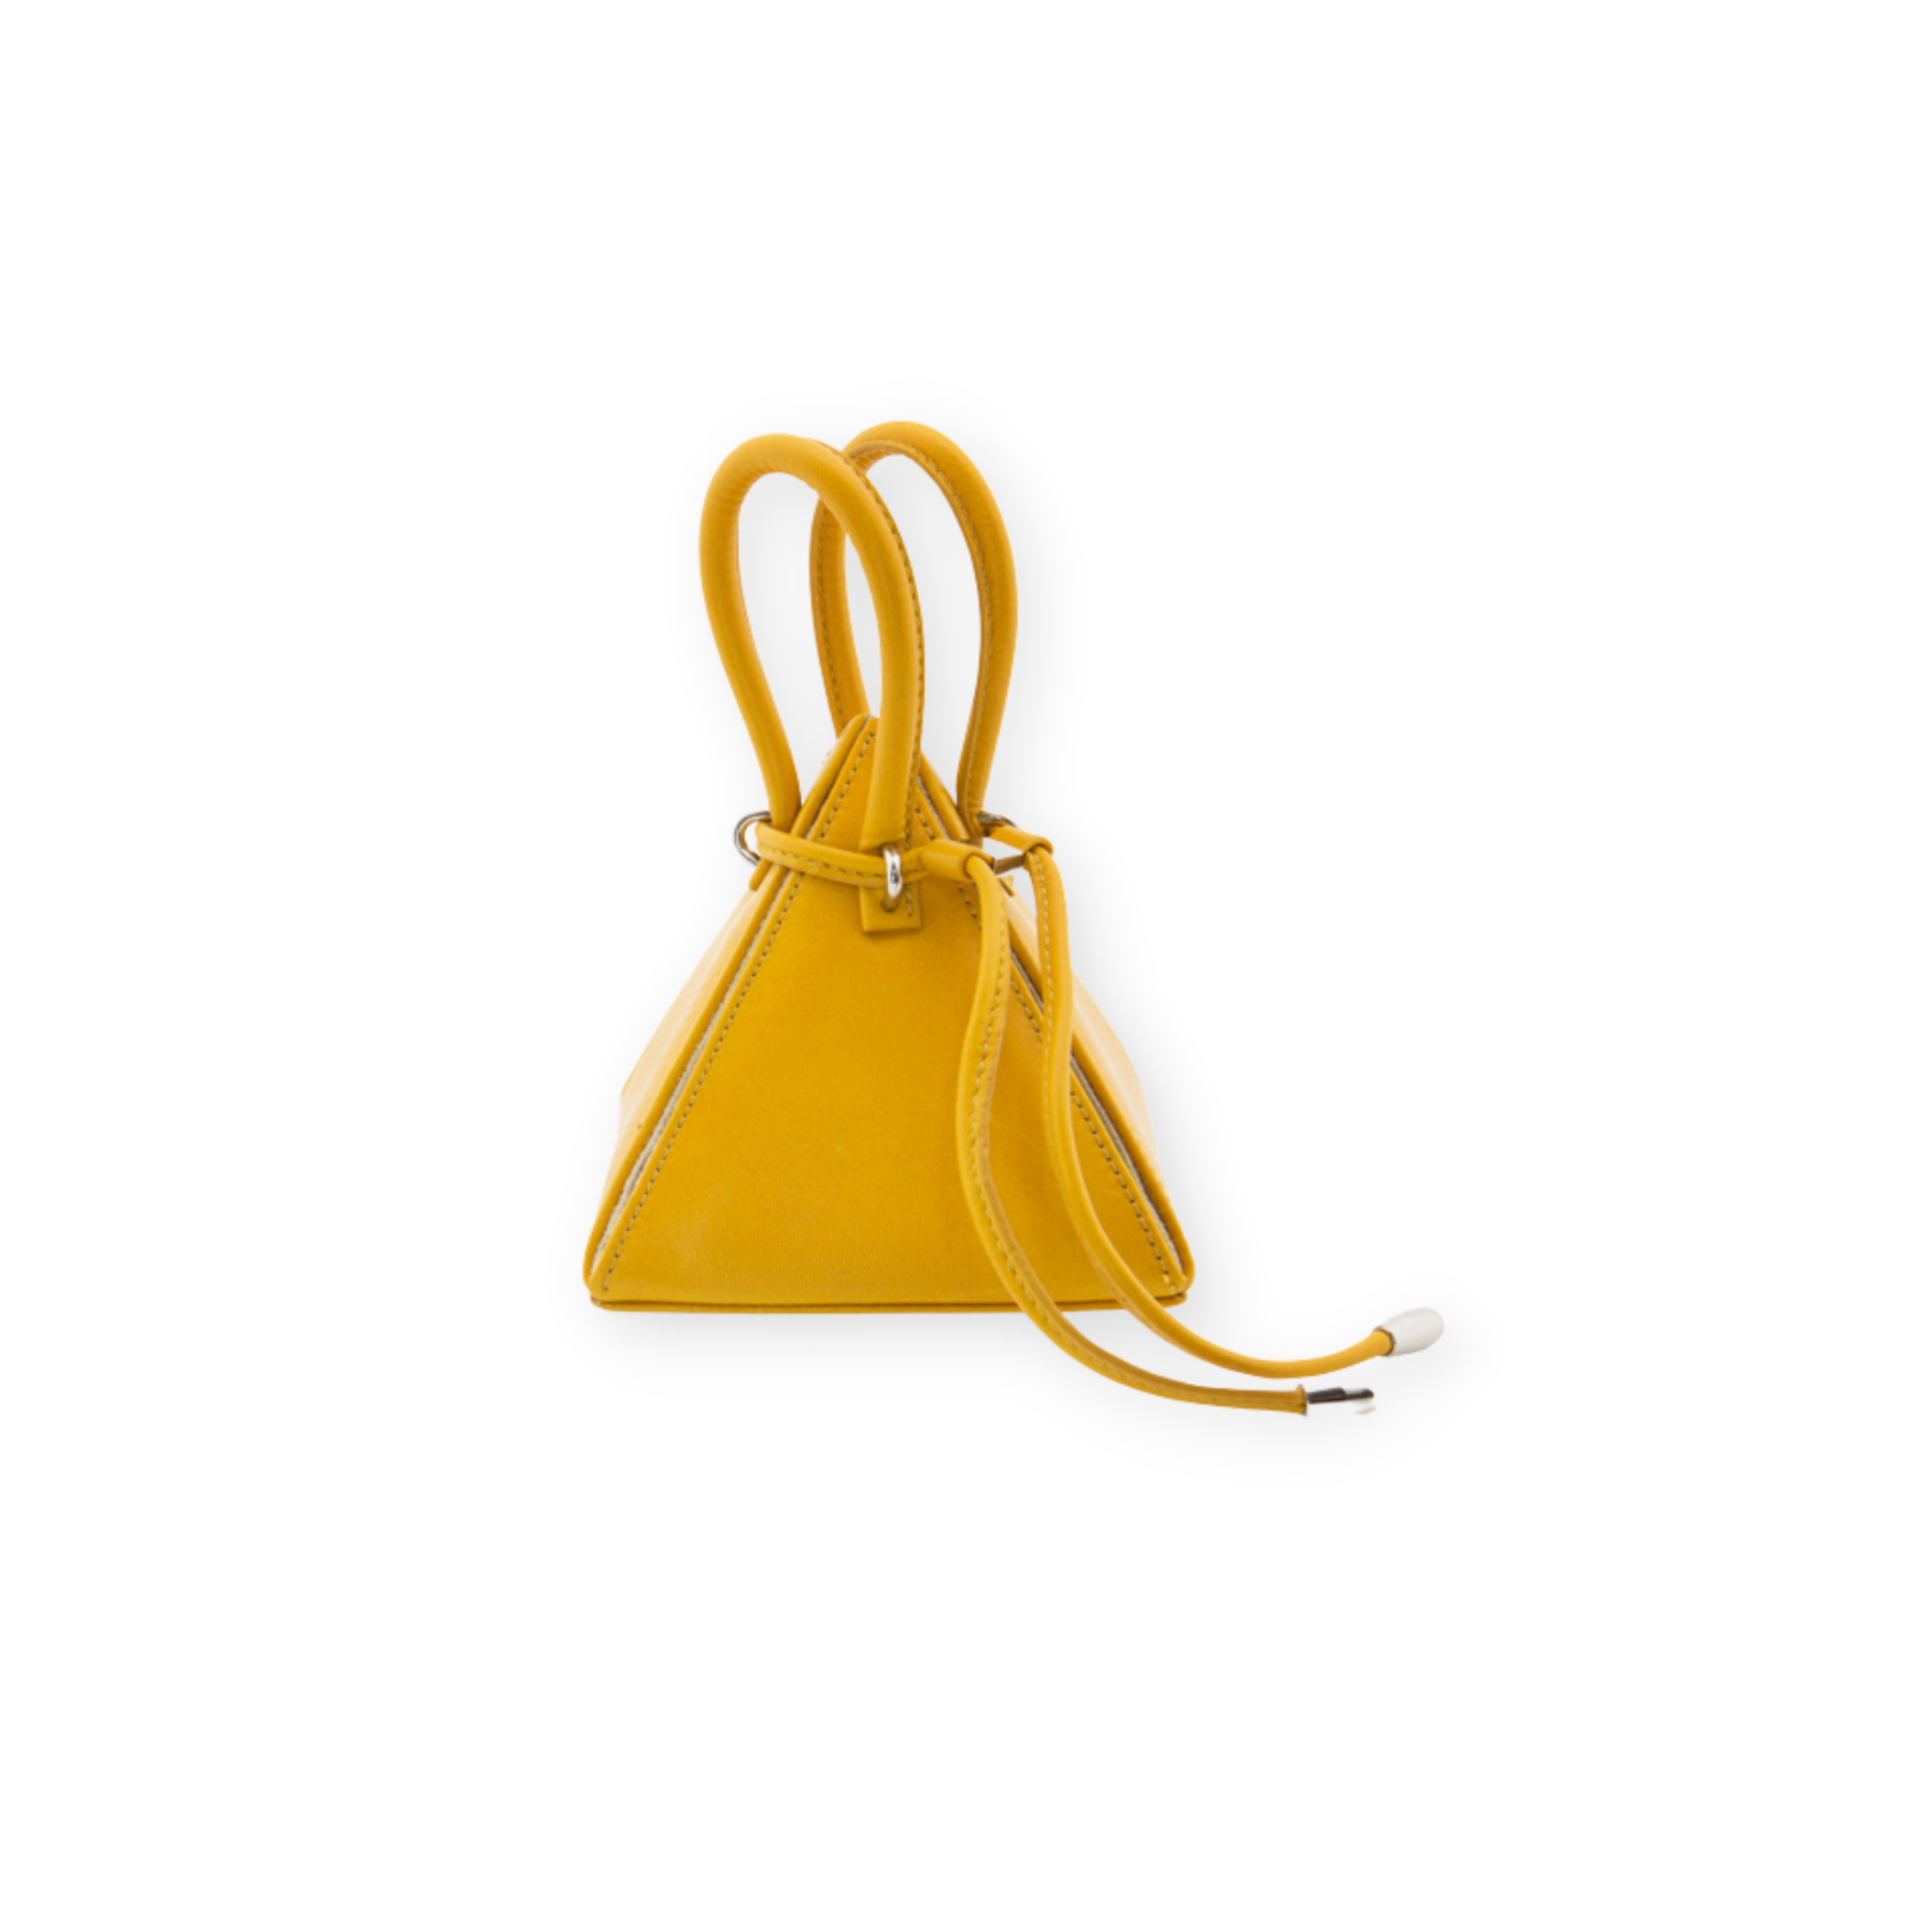 Buy now the Iconic Lia Handbag inspired by the geometric shapes of our designer's birth city Barcelona, and its world known artist, Antonio Gaudí, architect of the world wonder La Sagrada Familia. The Iconic Lia Amber Mini bag has a unique and functional pyramidal design able to fit all your essentials. 